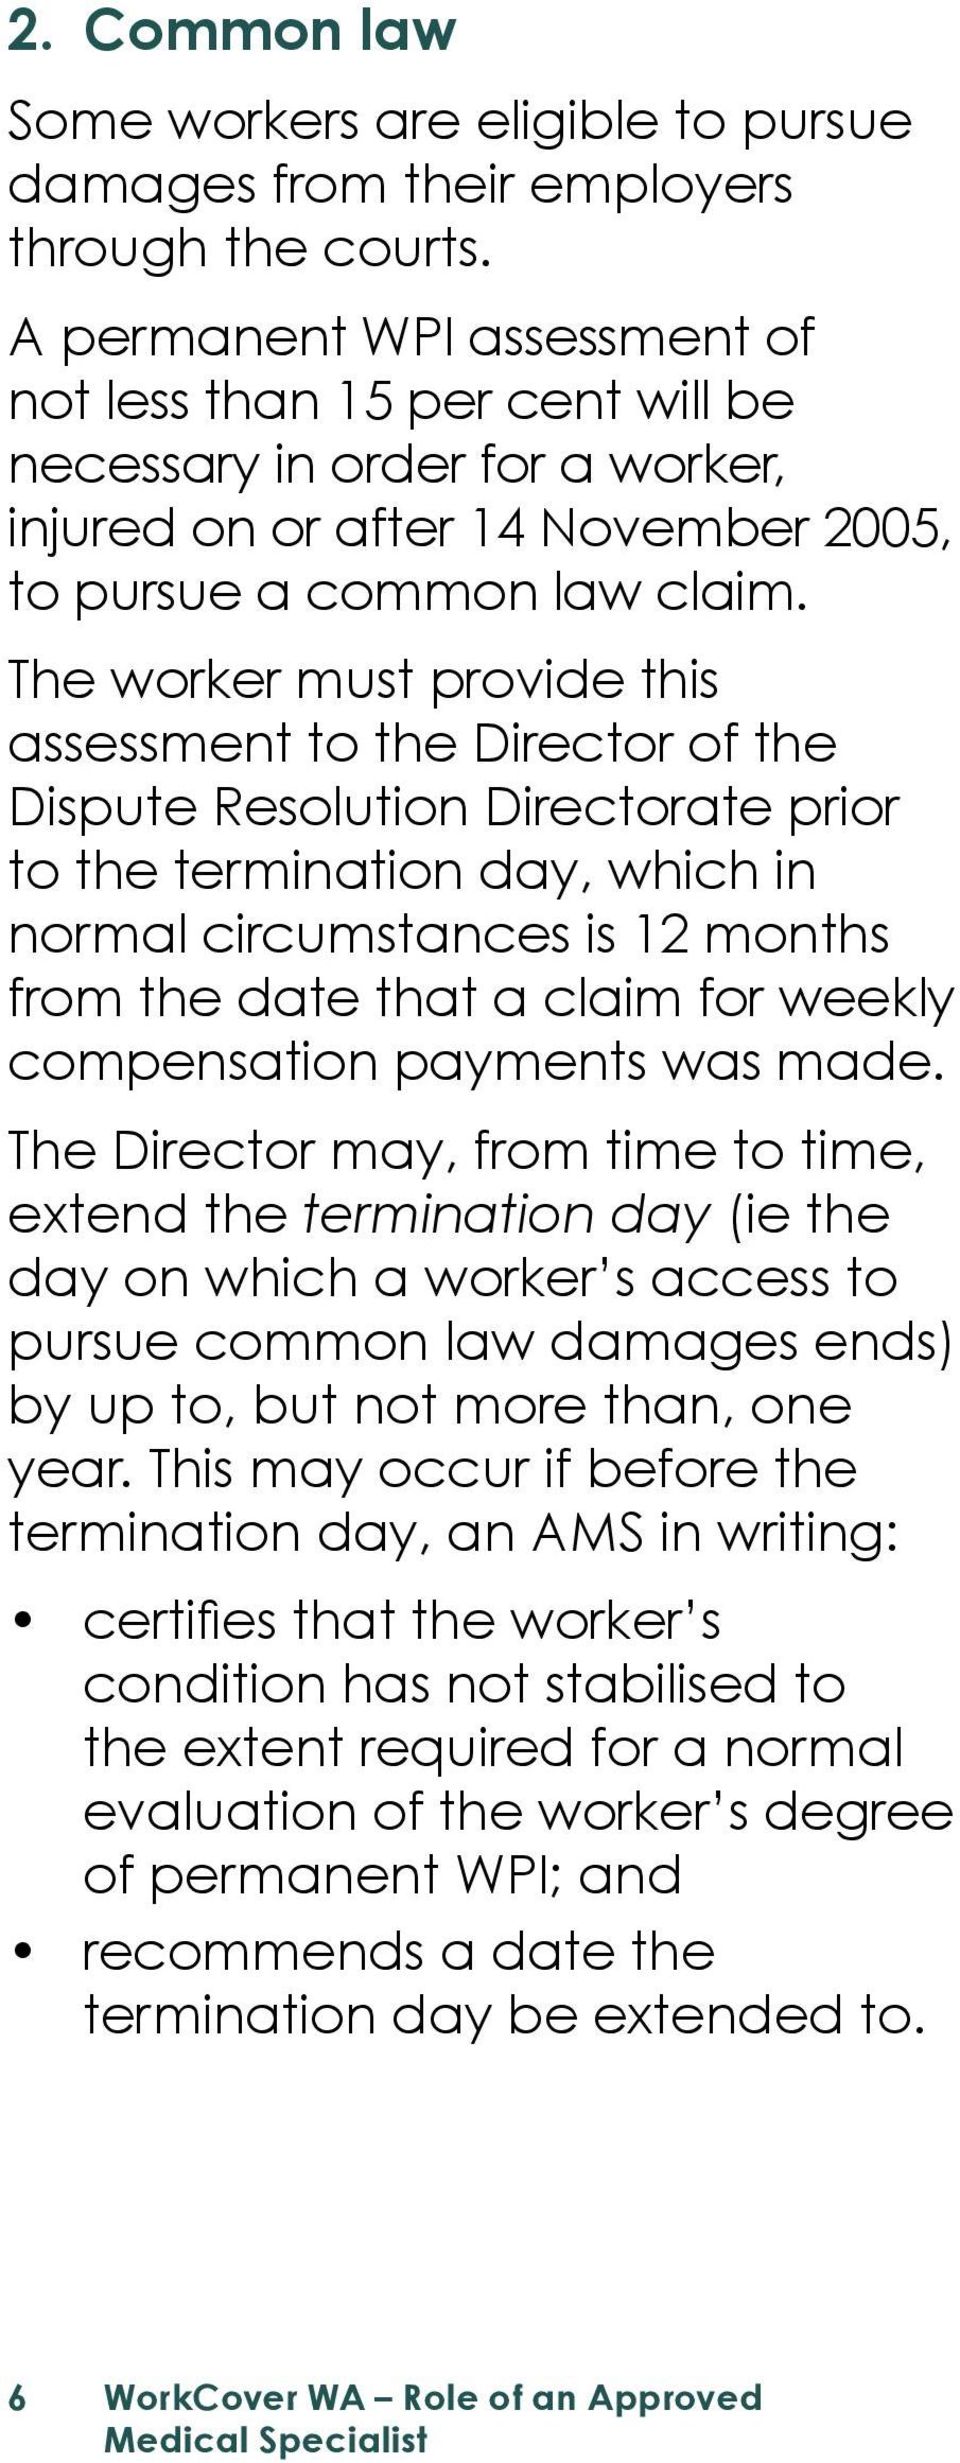 The worker must provide this assessment to the Director of the Dispute Resolution Directorate prior to the termination day, which in normal circumstances is 12 months from the date that a claim for